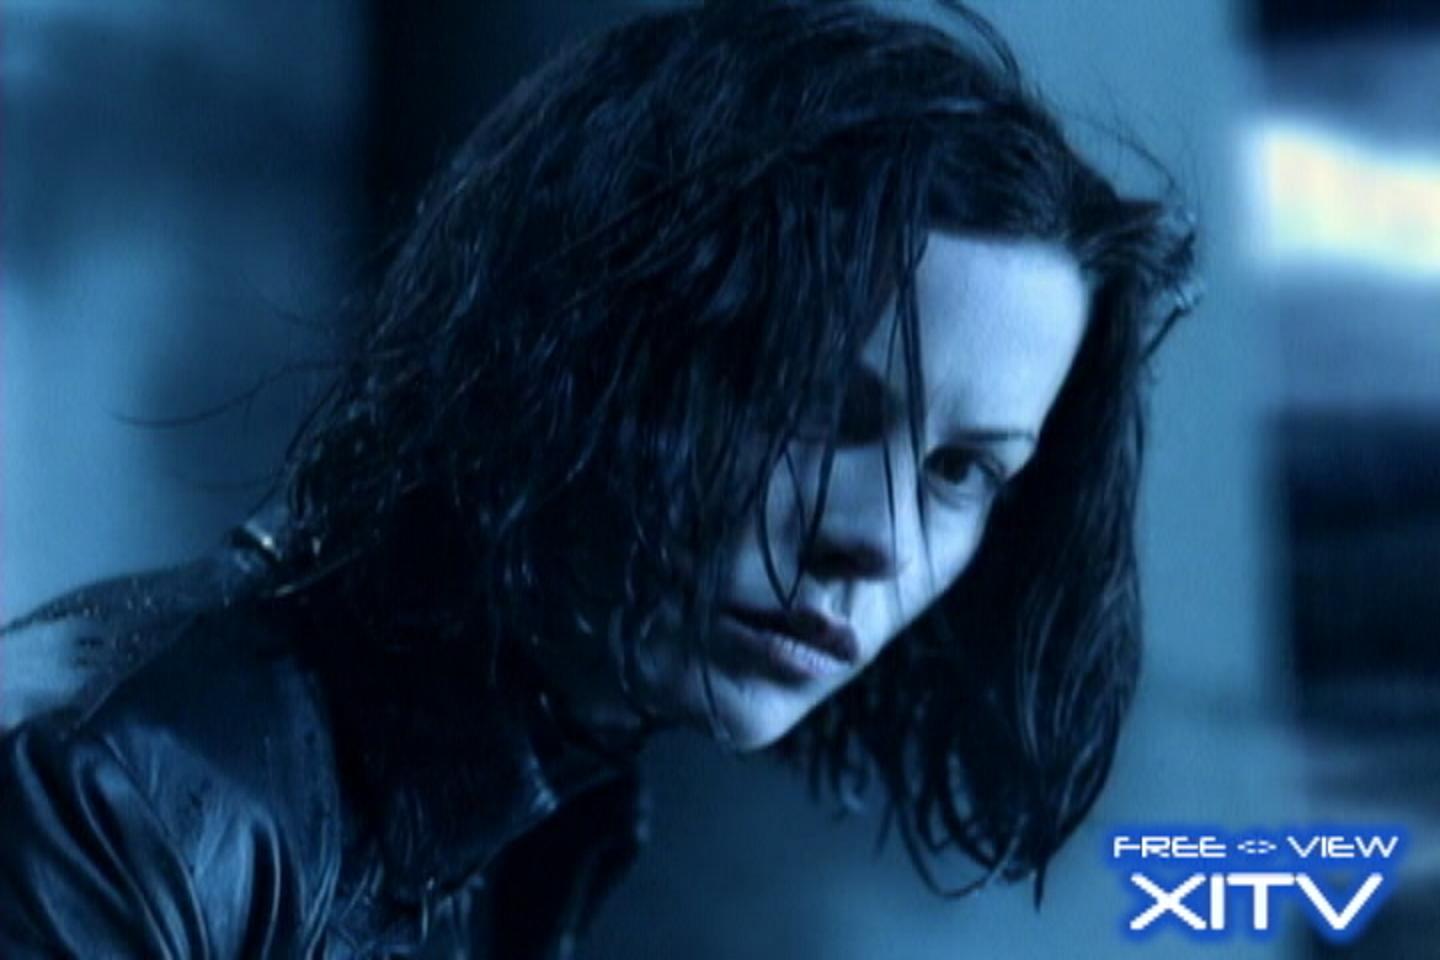 Watch Now! XITV FREE <> VIEW  "UNDERWORLD" Starring Kate Beckinsale! XITV Is Must See TV! 